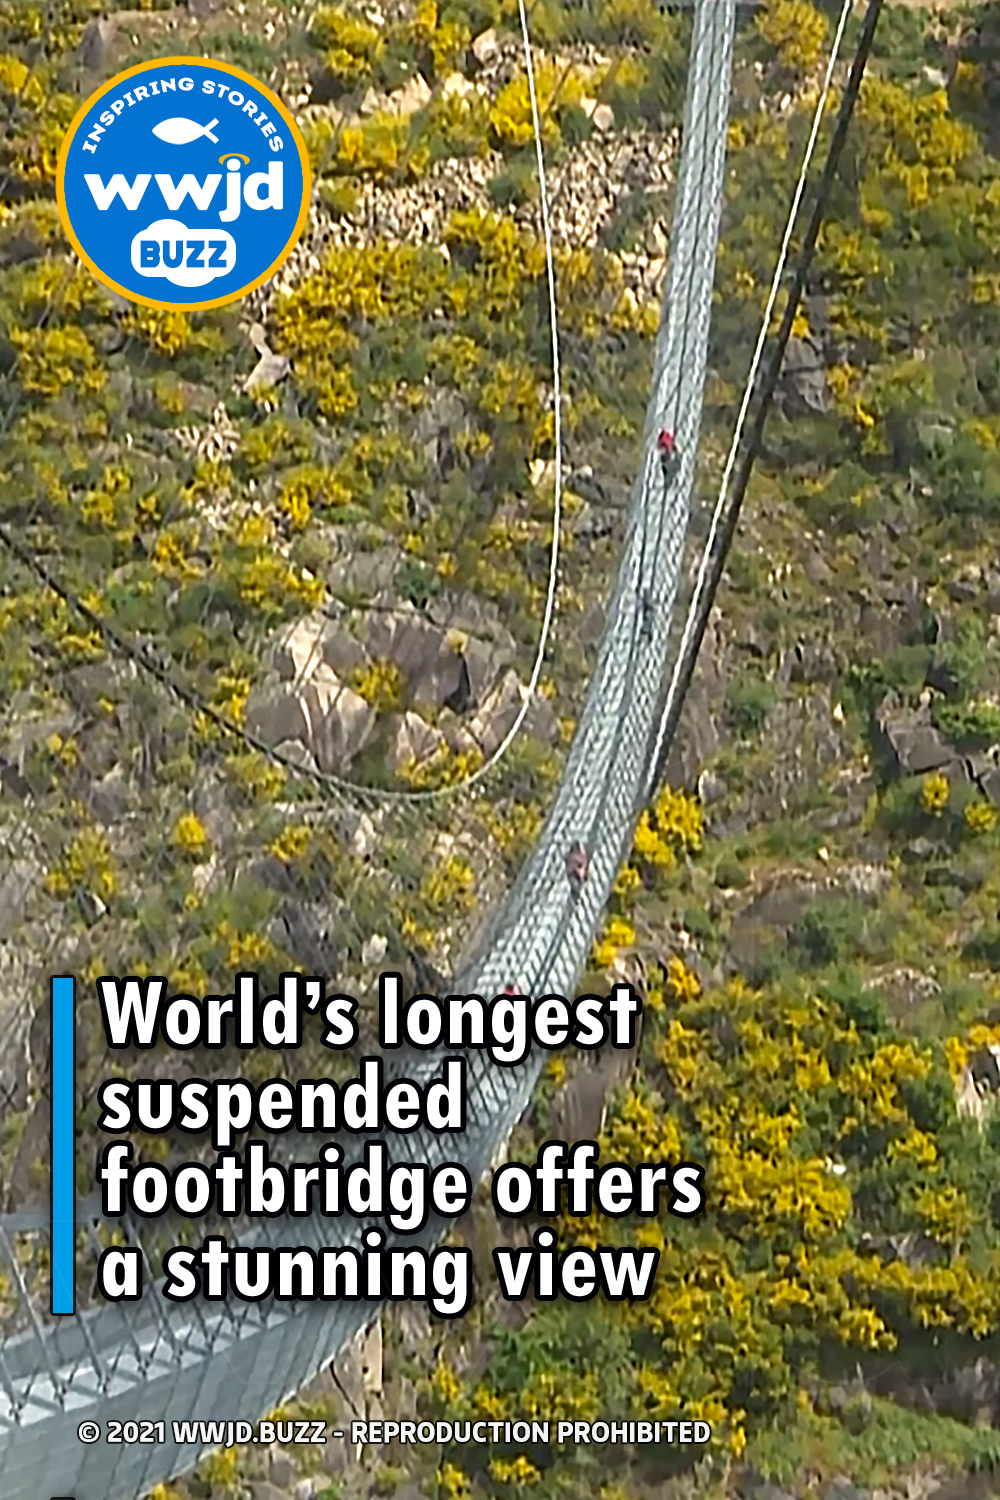 World’s longest suspended footbridge offers a stunning view